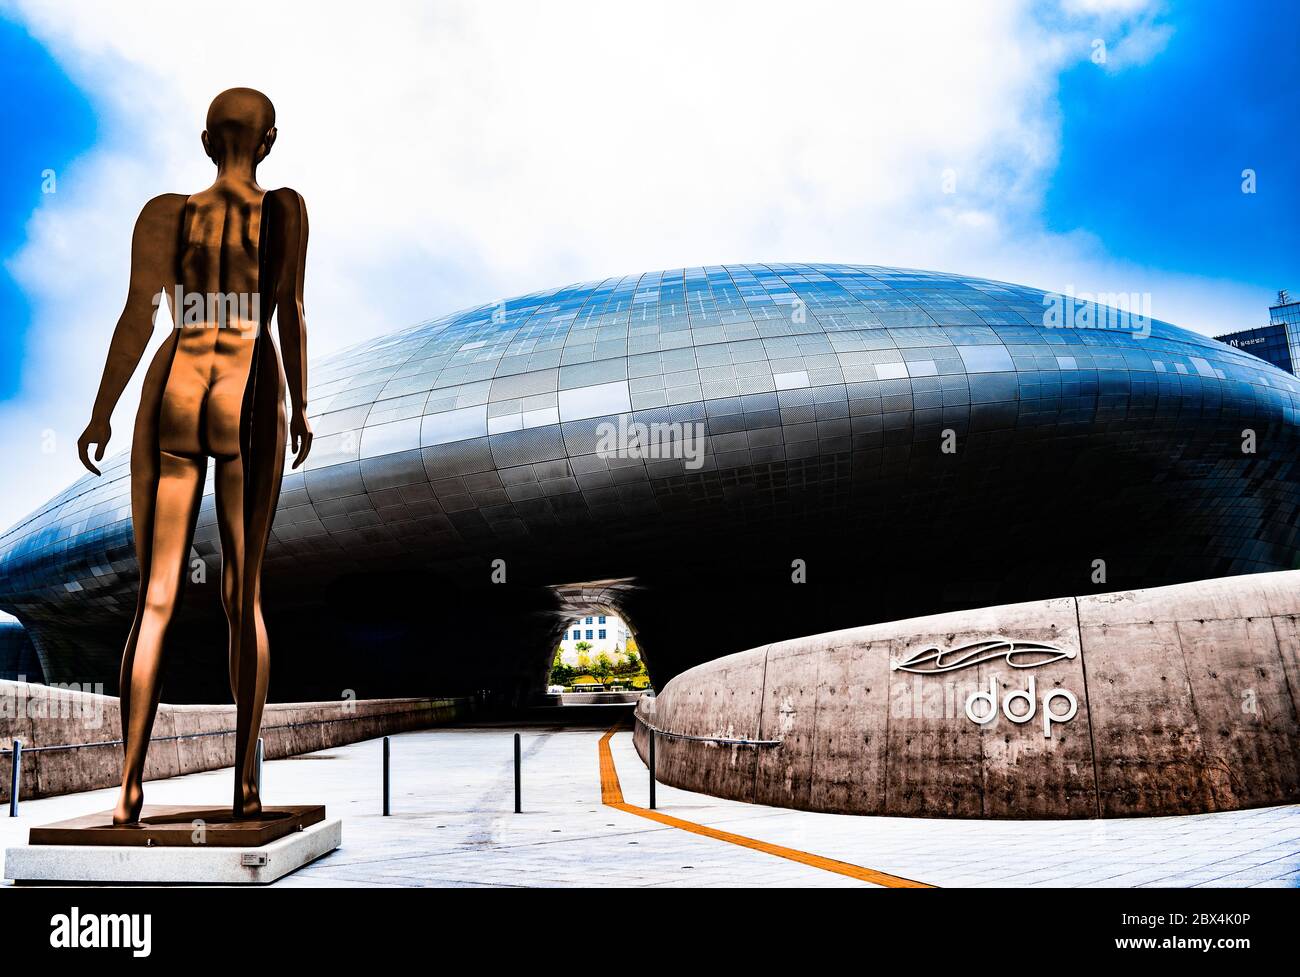 Scene from Dongdaemun History Culture Park and Design Plaza Stock Photo